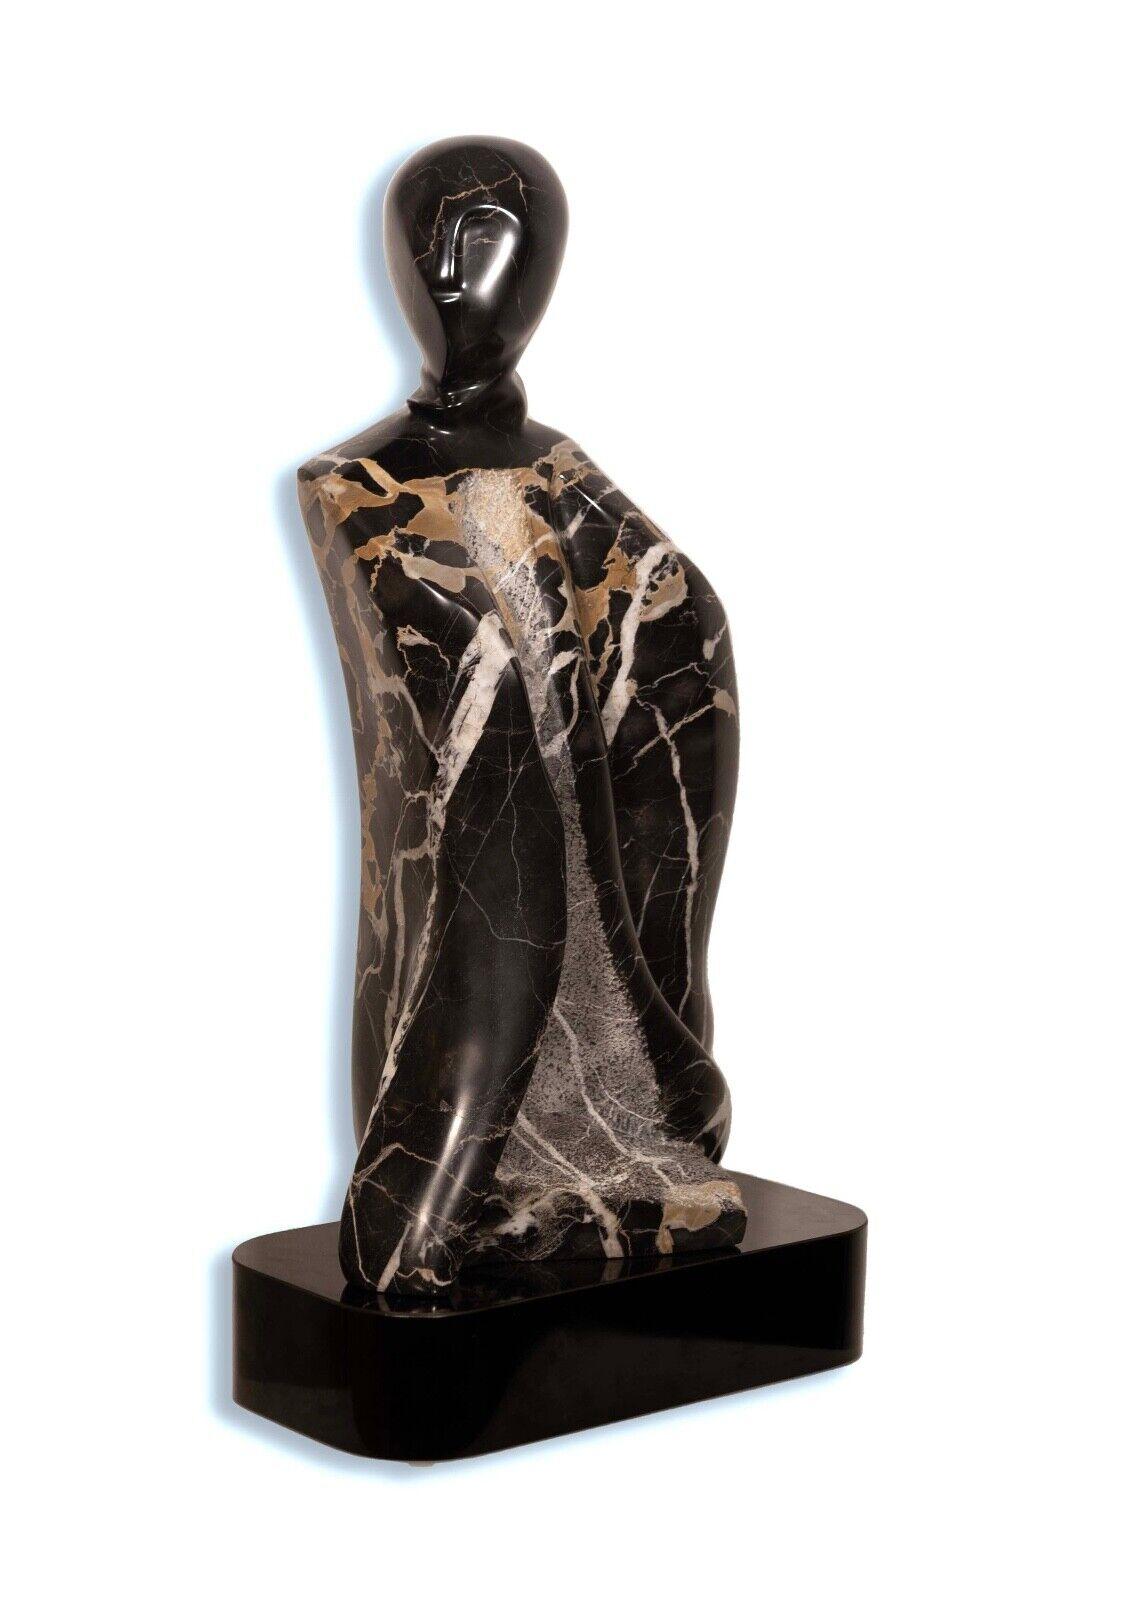 An elegant contemporary marble abstracted figurative sculpture on a base signed Lora Ross. A marvelous modern accent within a space. From a private collection; originally purchased from a gallery in Palm Springs, FL. Dimensions: 12